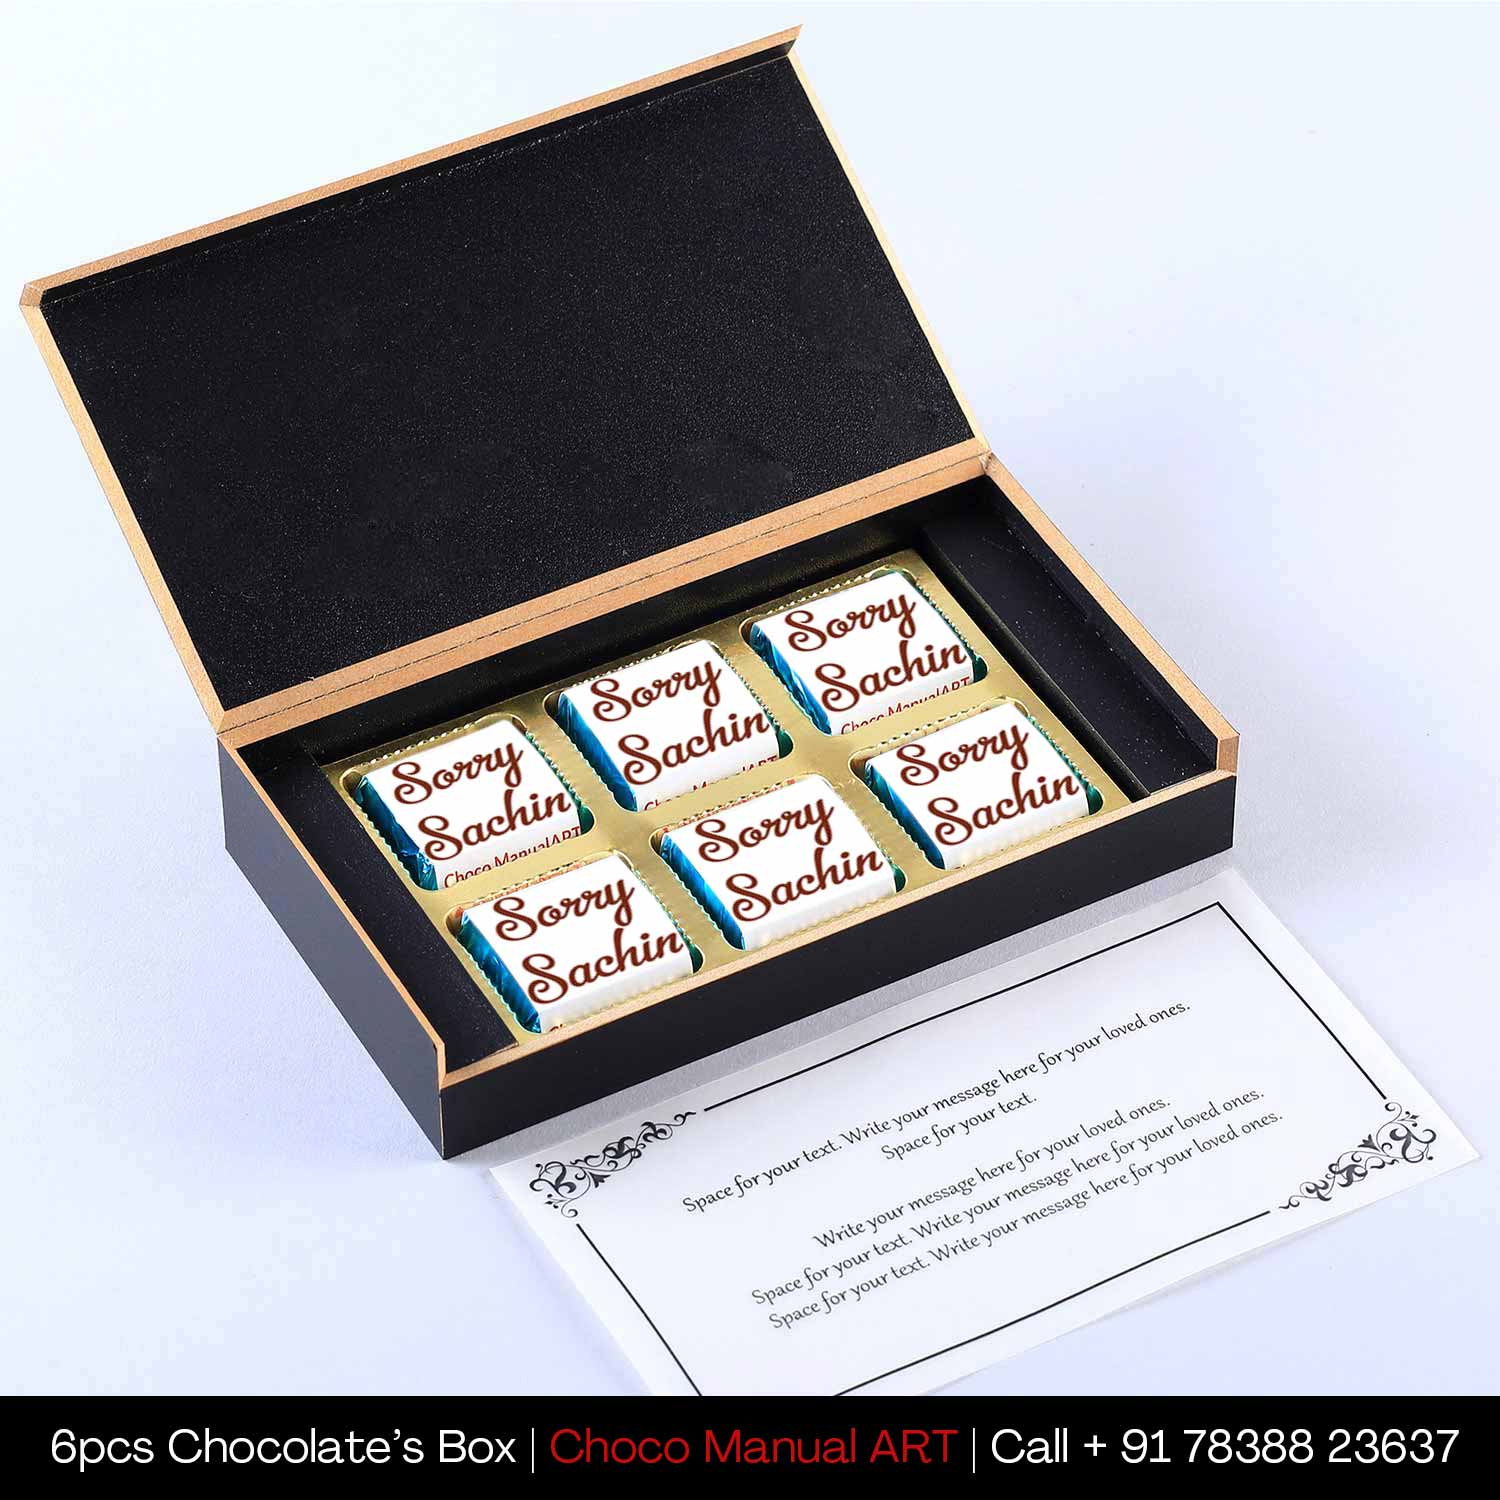 Best online gift in india I Wooden packaging I Personalised